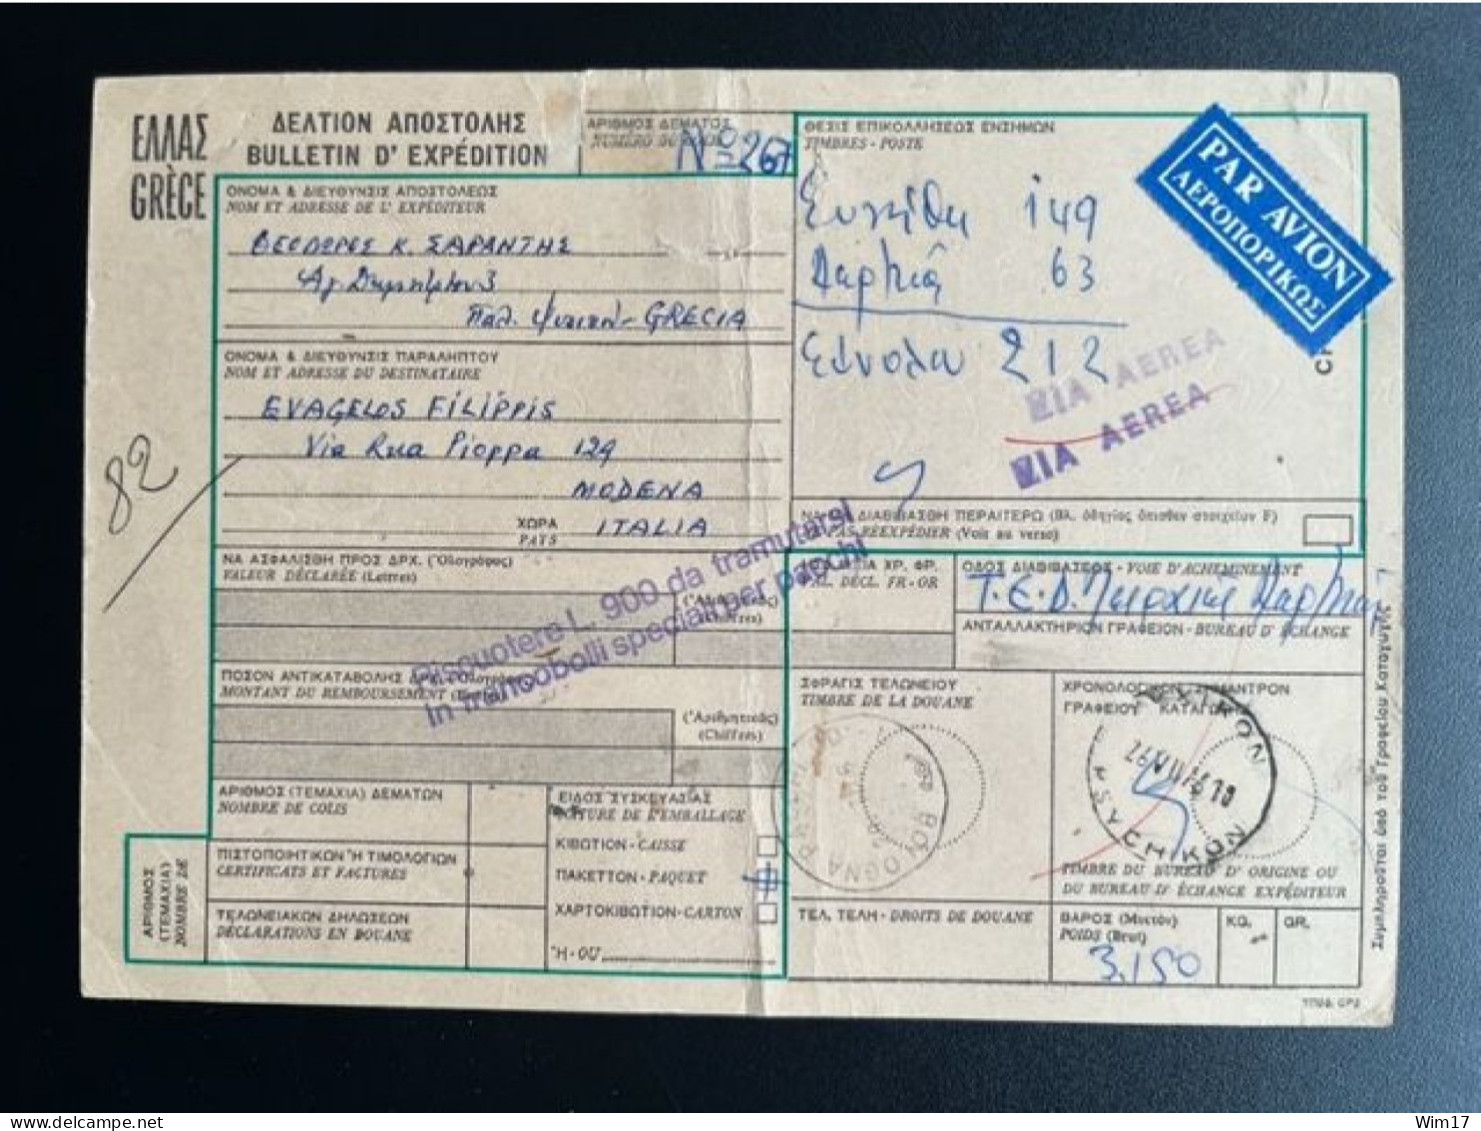 GREECE 1976 PARCEL CARD PSYCHIKO TO MODENA ITALY 26-07-1976 GRIEKENLAND - Lettres & Documents